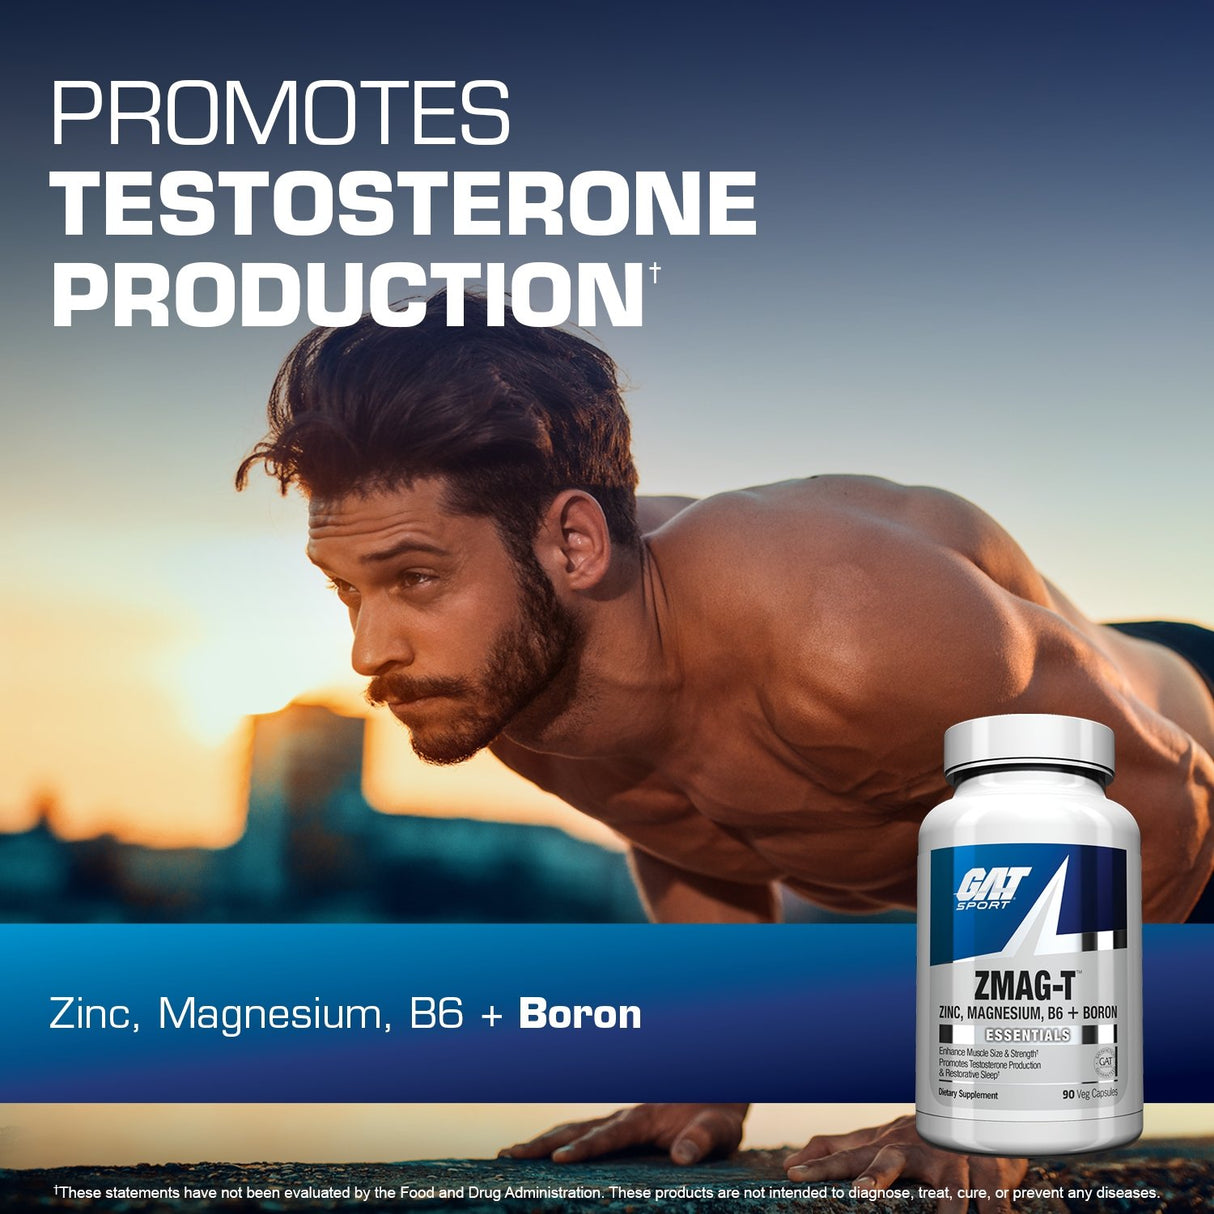 ZMAG-T Overnight Recovery Support - promotes testosterone production